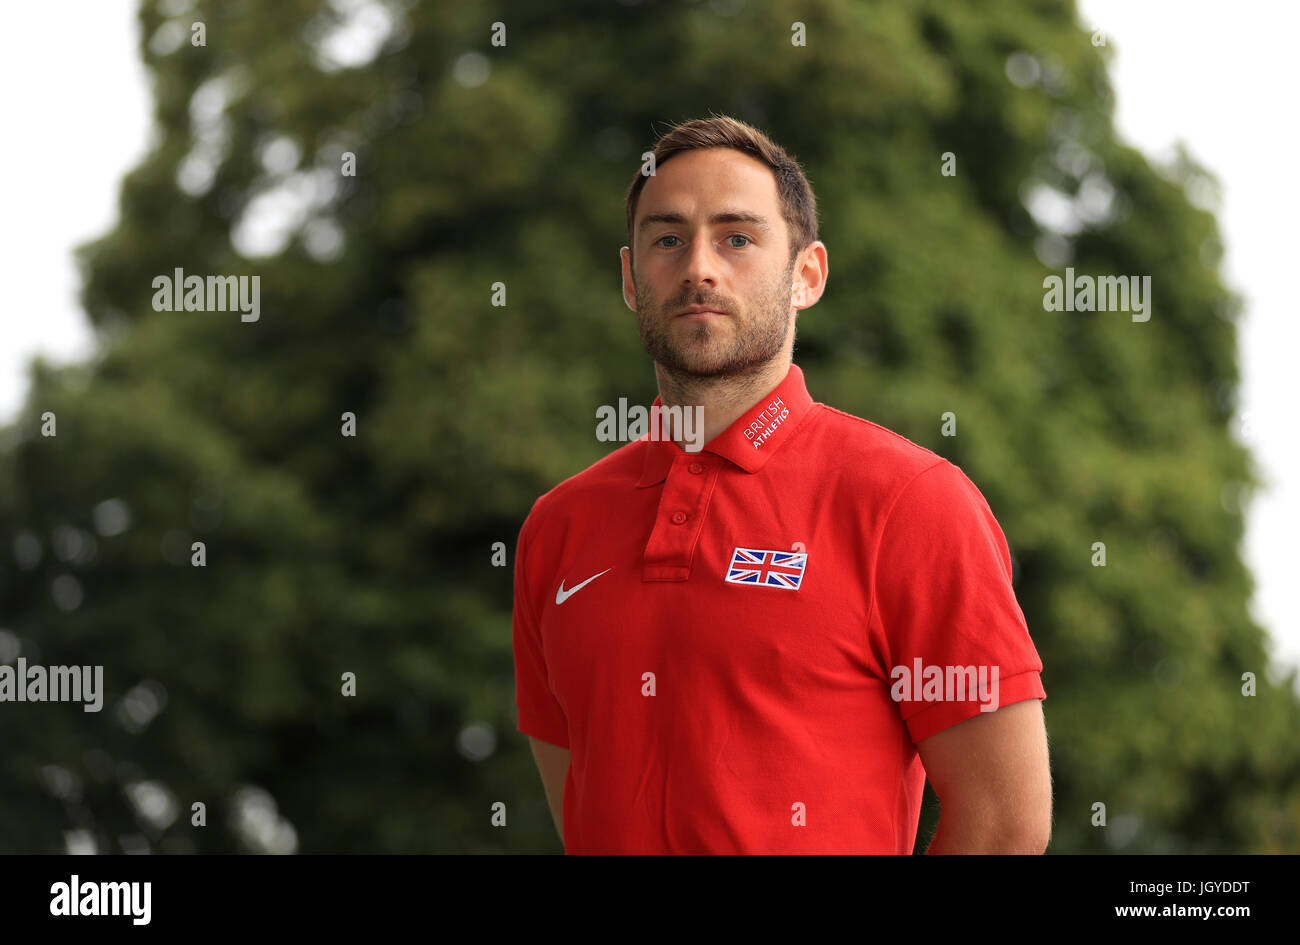 Decathlete Ashley Bryant during the team announcement ahead of the IAAF World Championships, at the Loughborough University High Performance Centre. PRESS ASSOCIATION Photo. Picture date: Tuesday July 11, 2017. See PA story ATHLETICS Worlds. Photo credit should read: Tim Goode/PA Wire Stock Photo